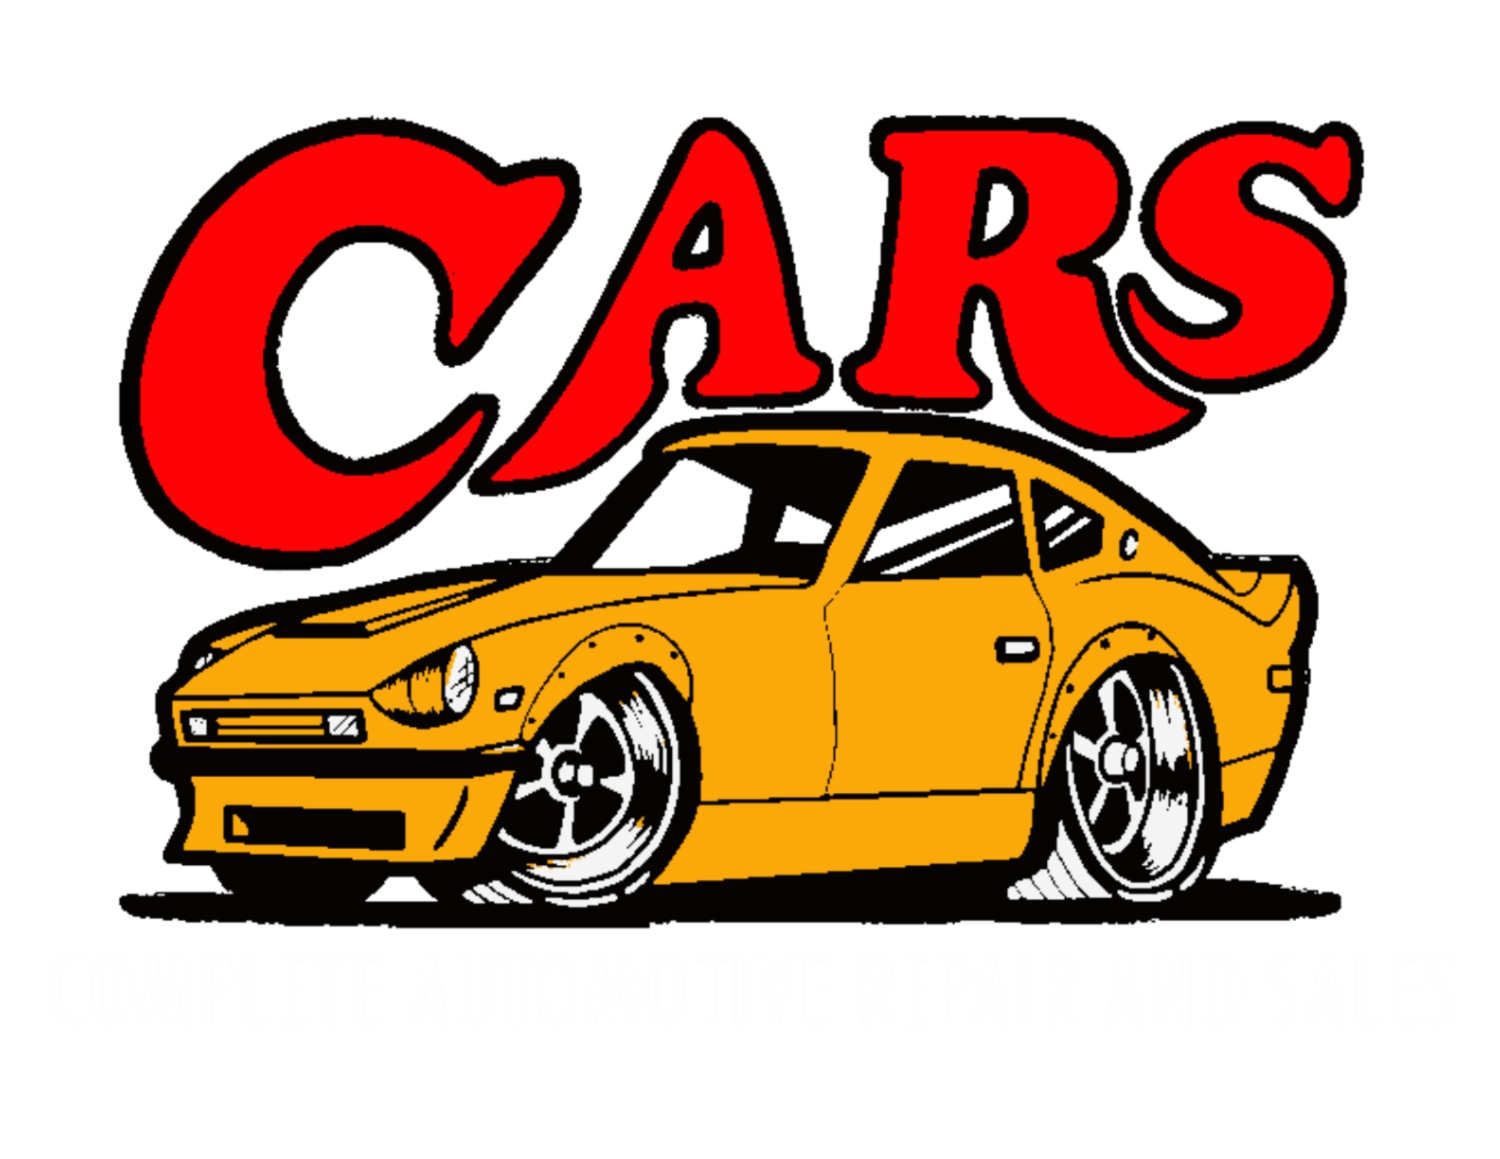 Complete Automotive Repair and Sales